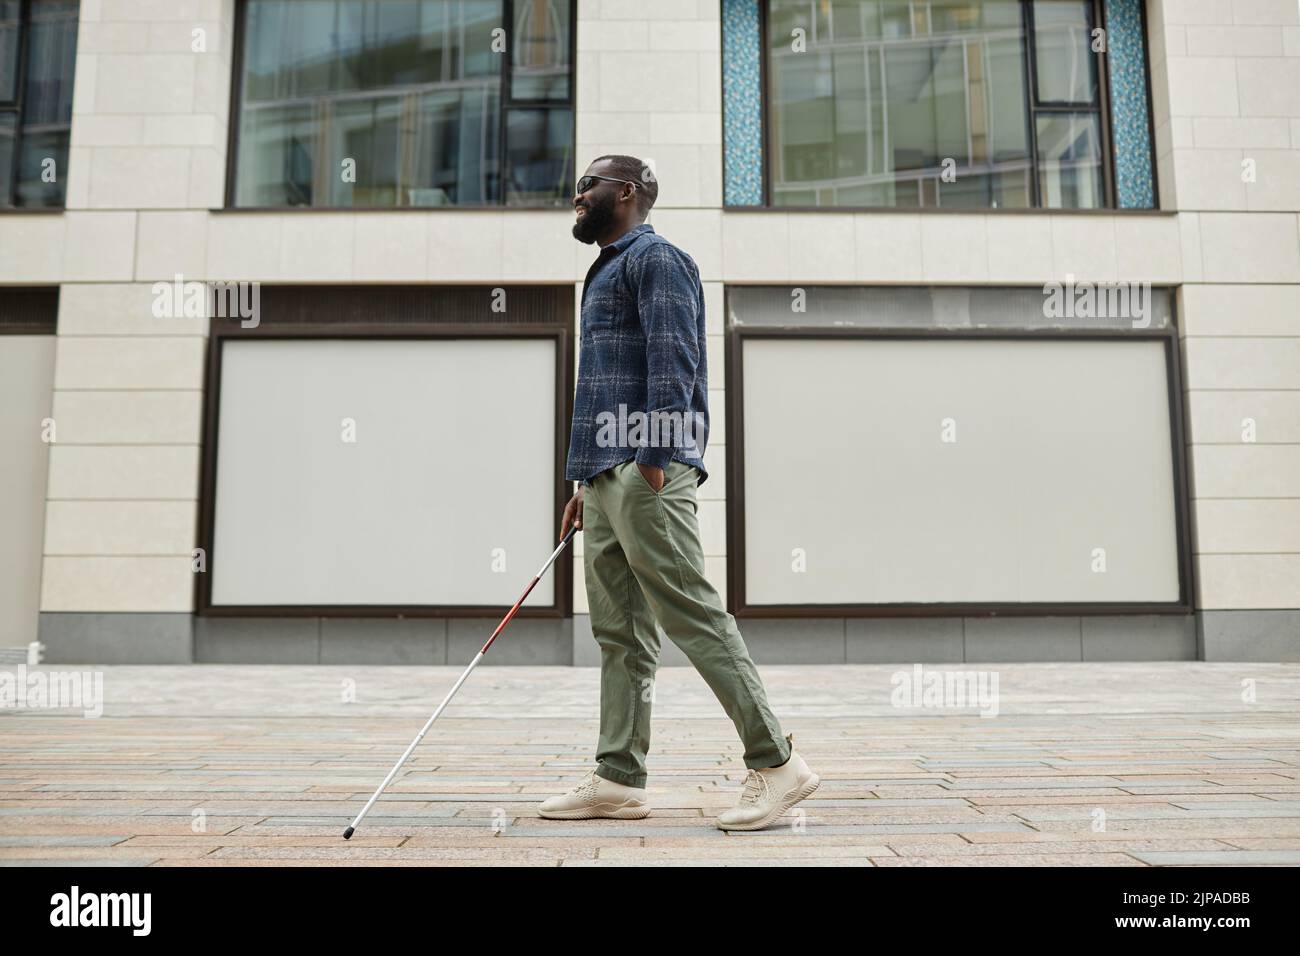 Full length portrait of smiling blind man walking in city and using cane, copy space Stock Photo